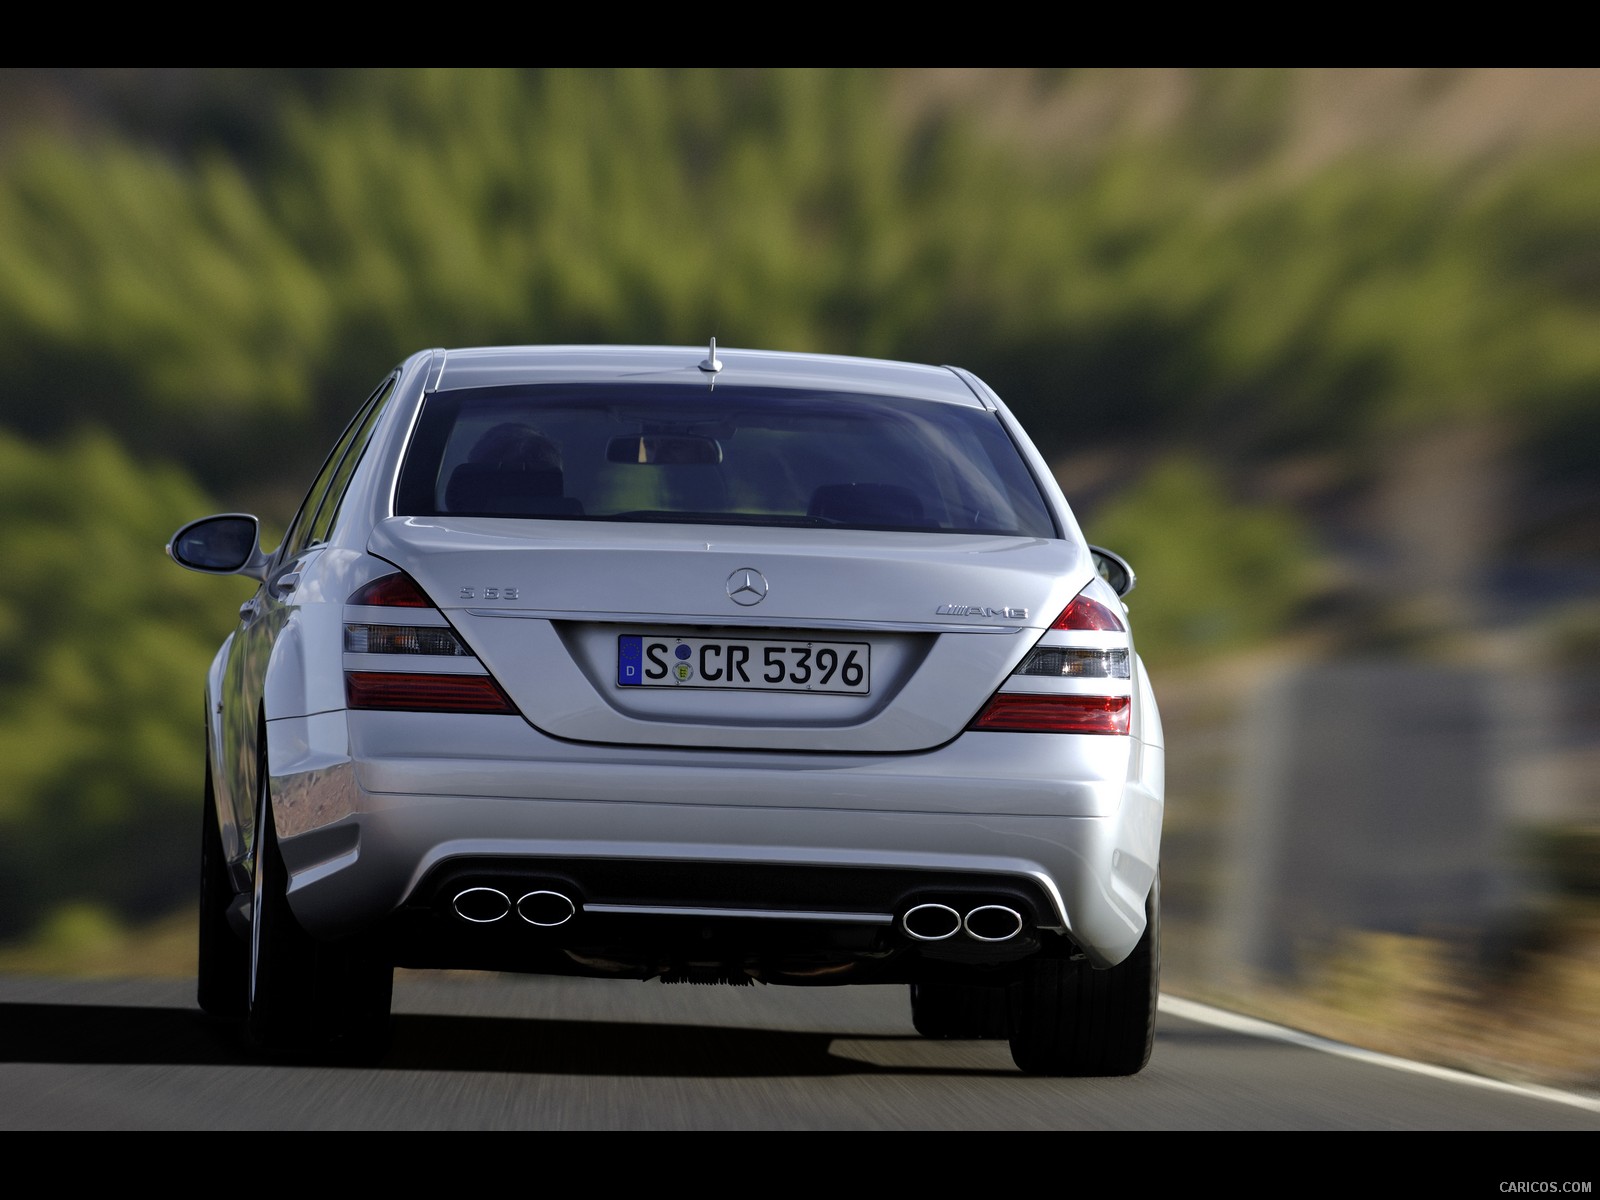 Mercedes-Benz S63 AMG (2010)  - Rear Angle , #7 of 12